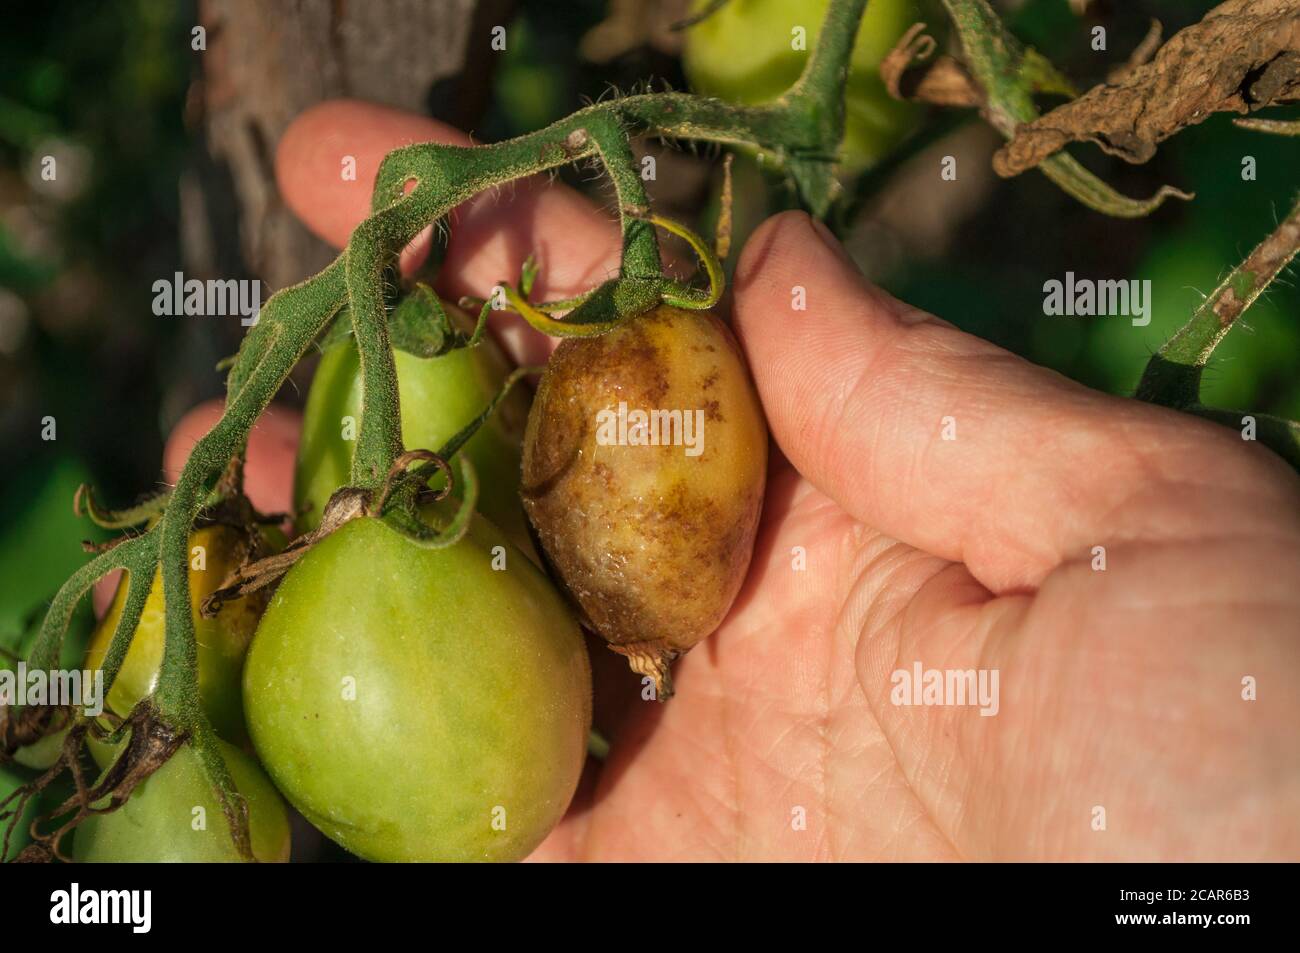 Part of a human palm  holding a bunch of tomatoes. One of the tomatoes is affected by late blight. Tomato diseases: late blight Stock Photo